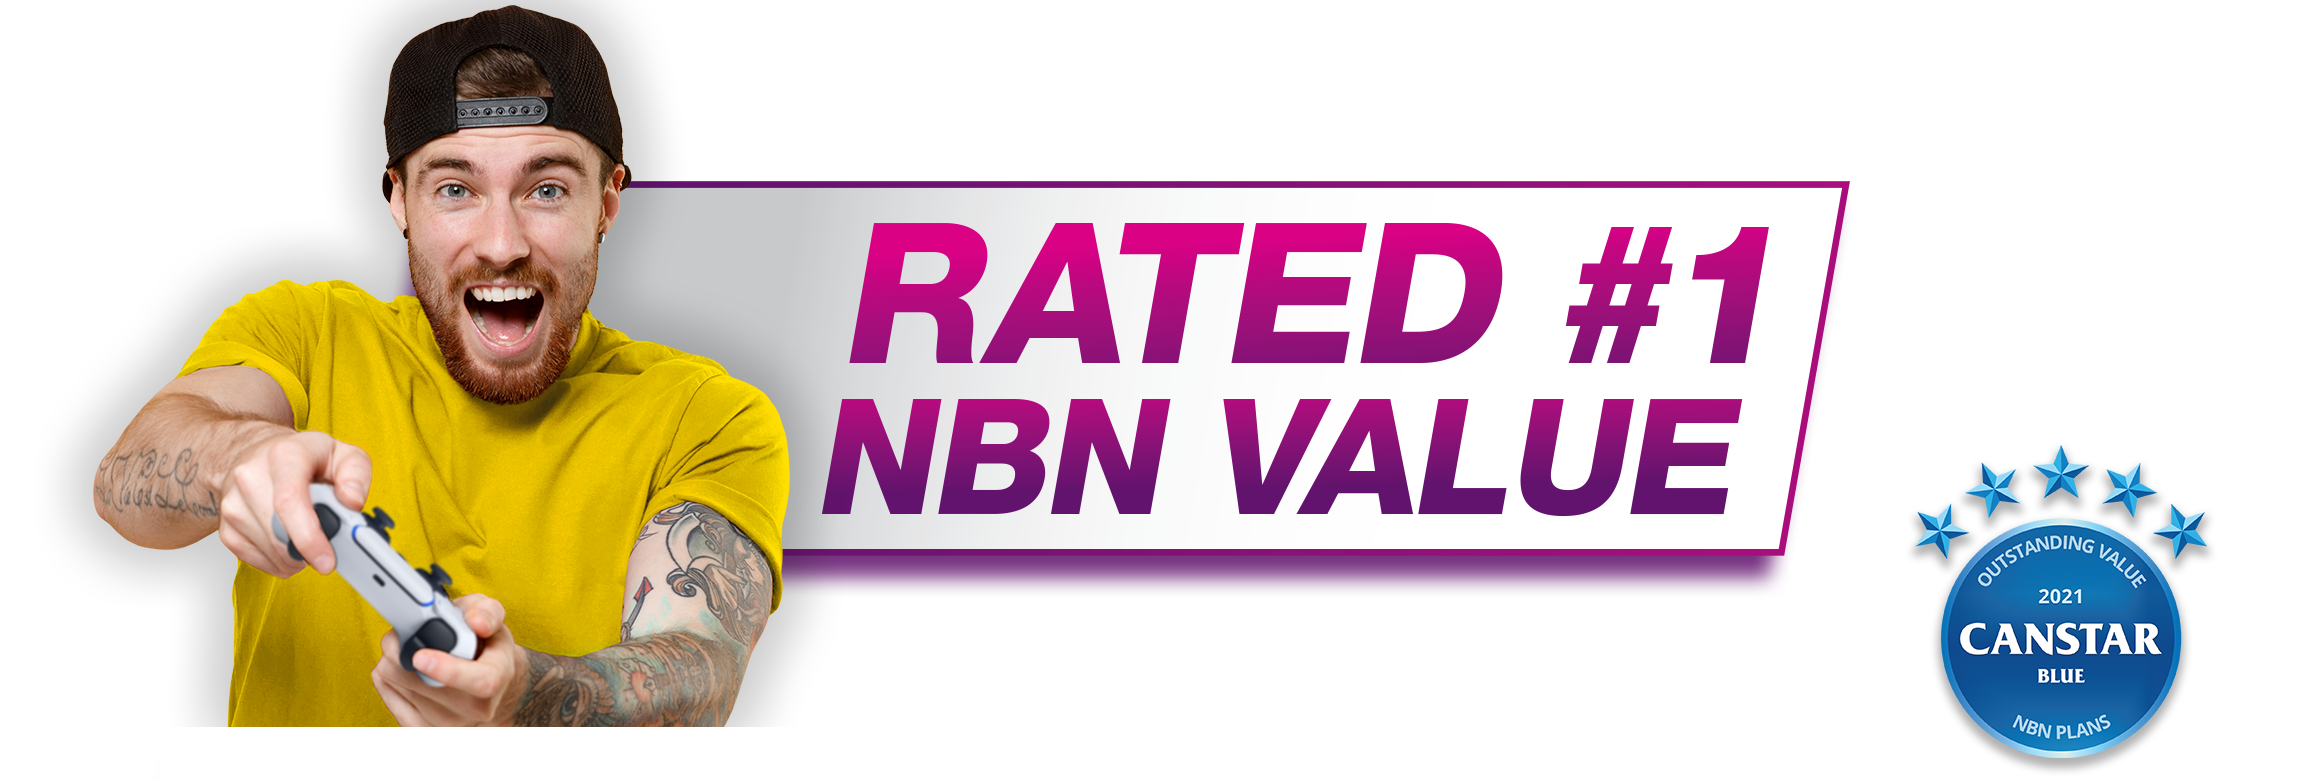 Get a great deal with our NBN plan range